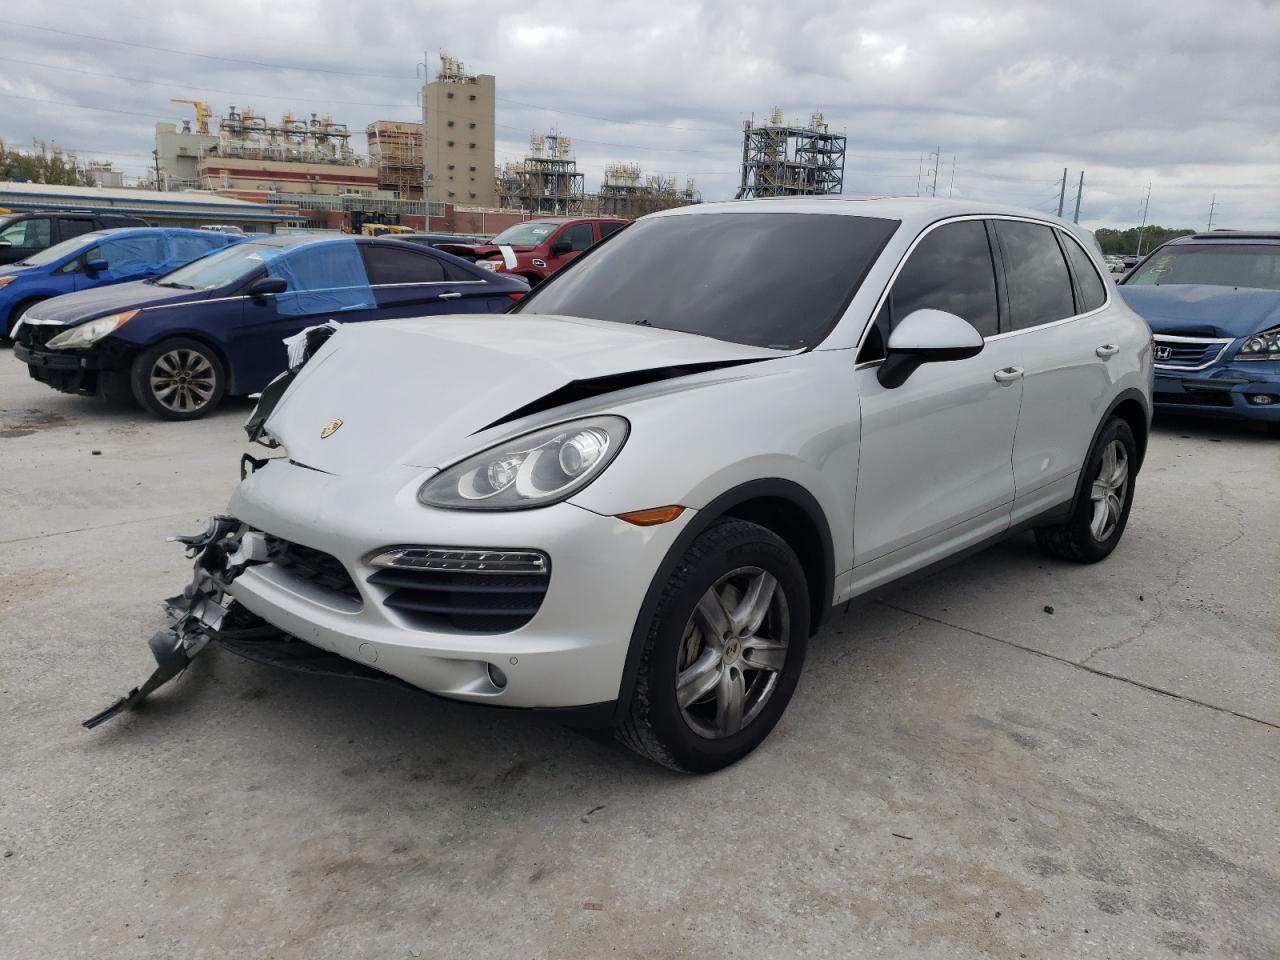 vin: WP1AB2A25CLA41624 WP1AB2A25CLA41624 2012 porsche cayenne 4800 for Sale in 70129 2348, La - New Orleans, New Orleans, Louisiana, USA